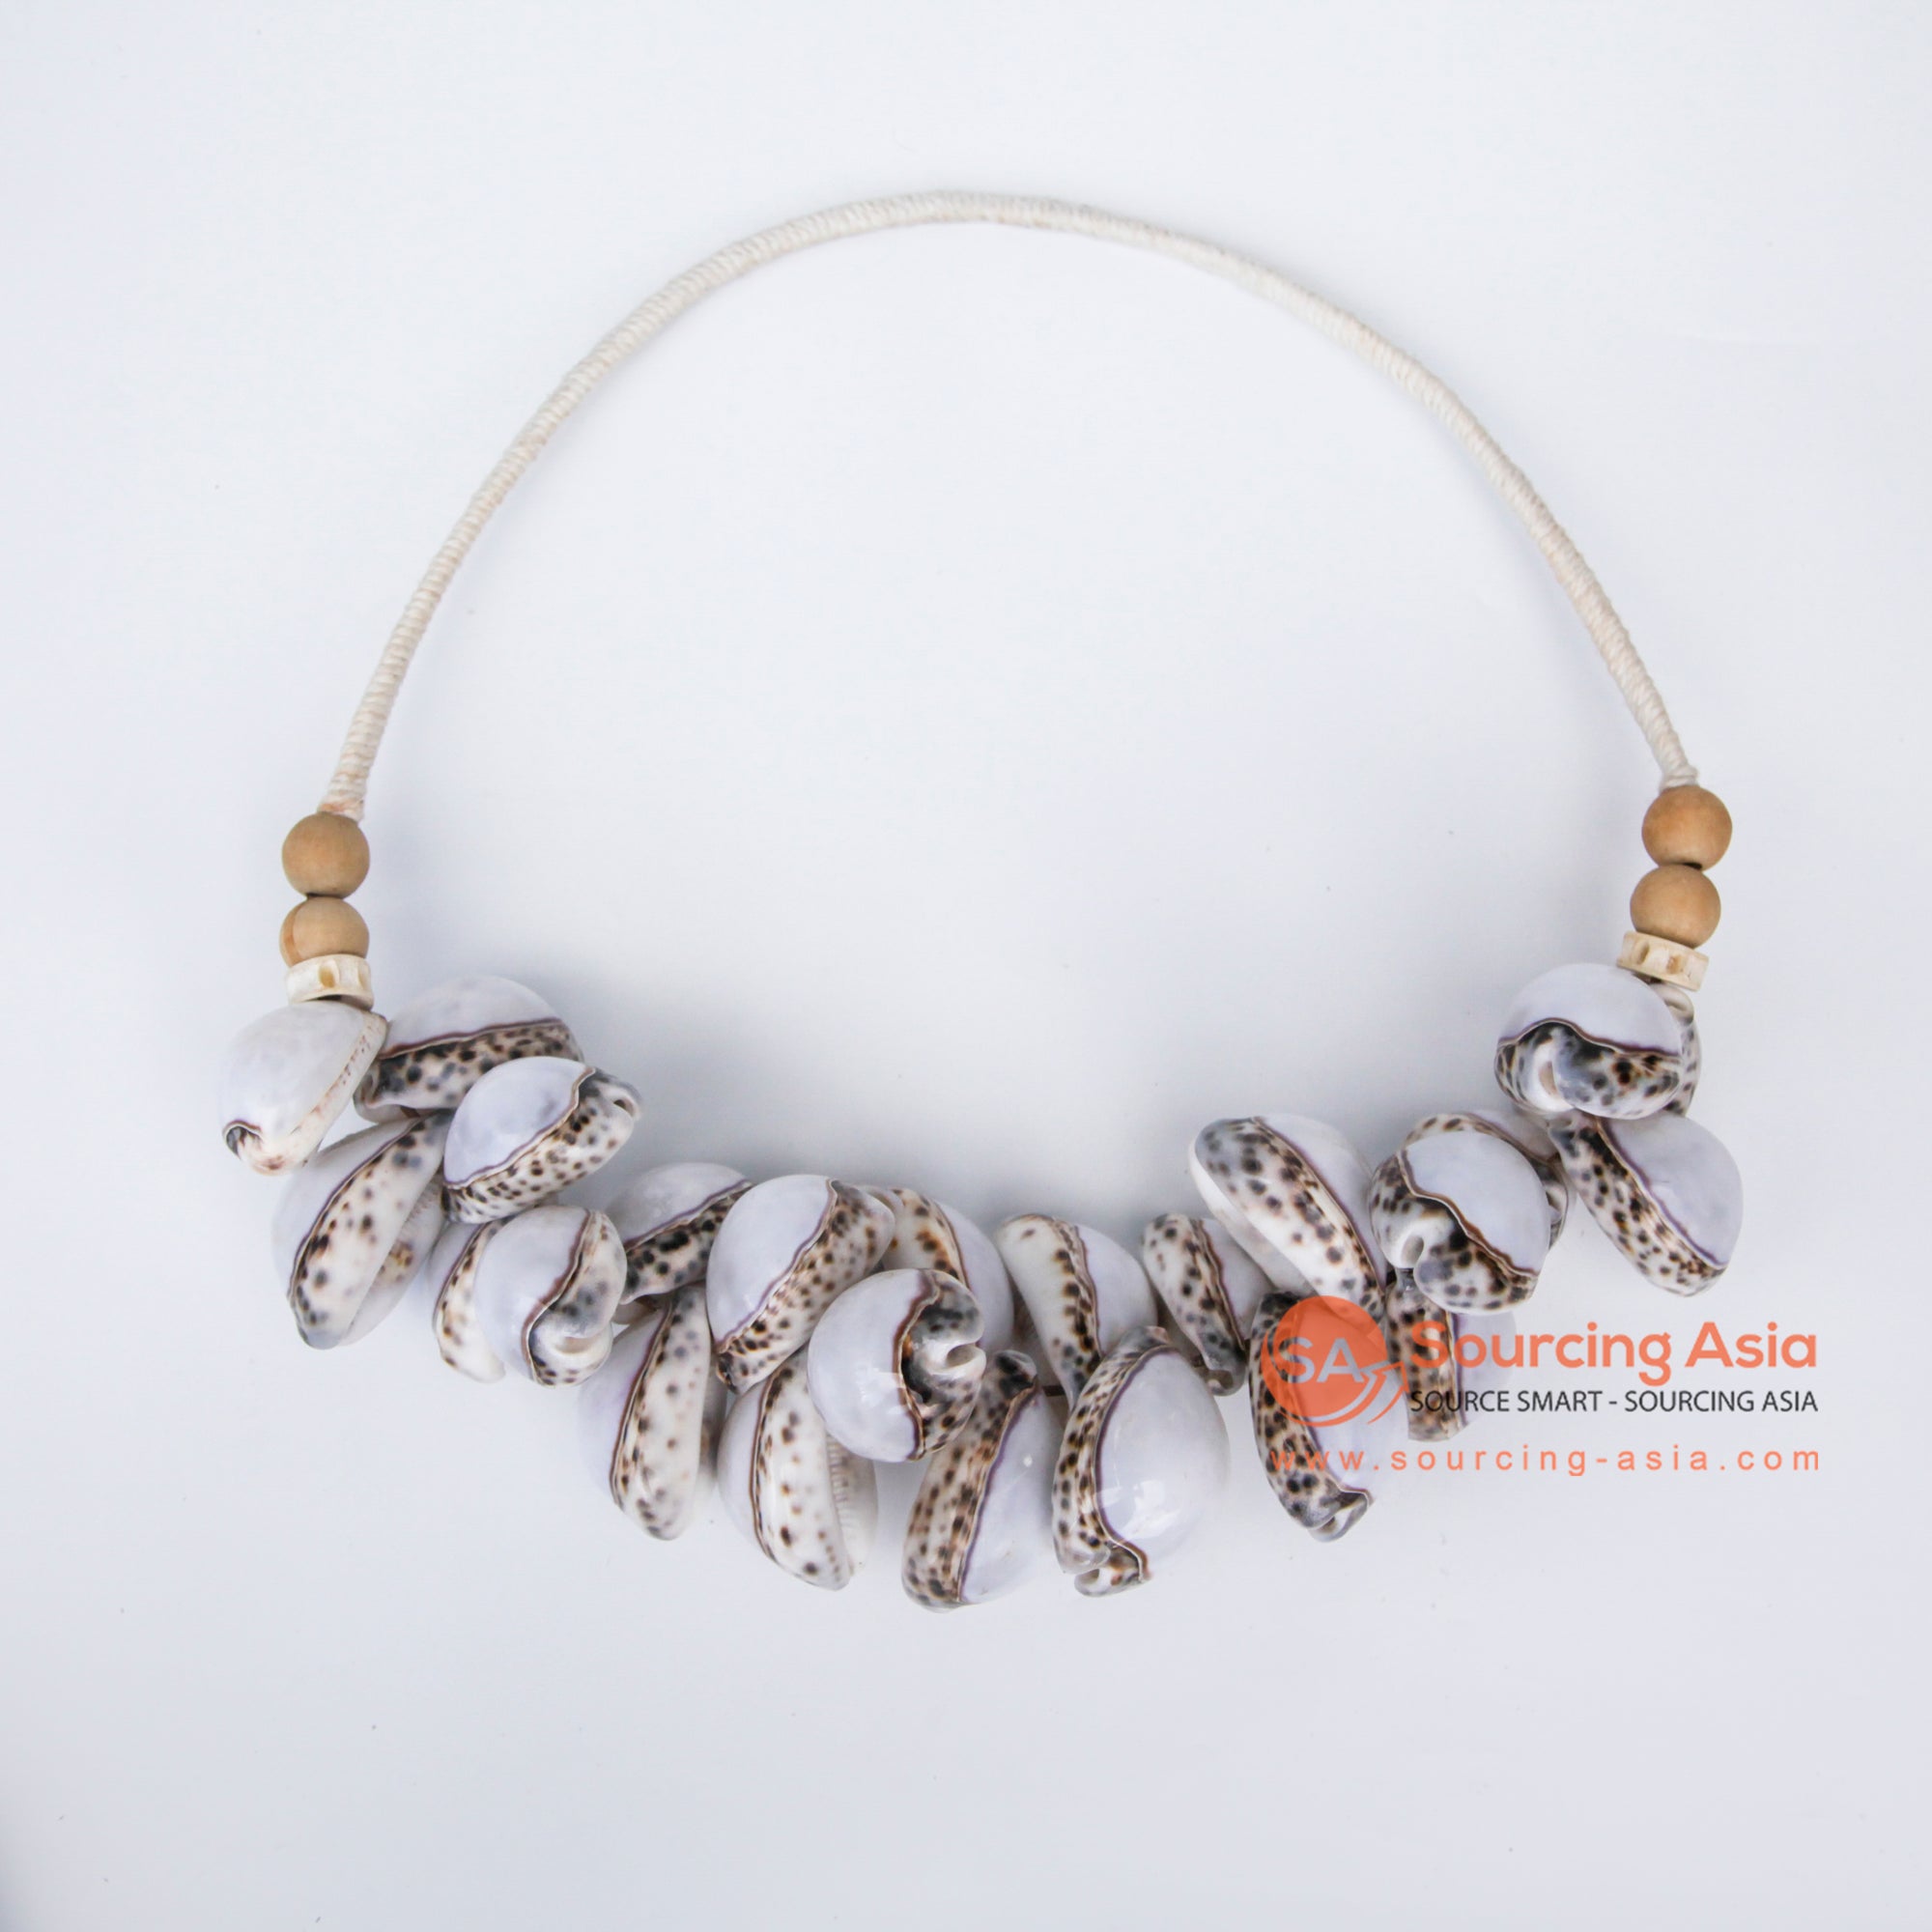 DHL084 NATURAL SHELL NECKLACE HANGING WALL DECORATION